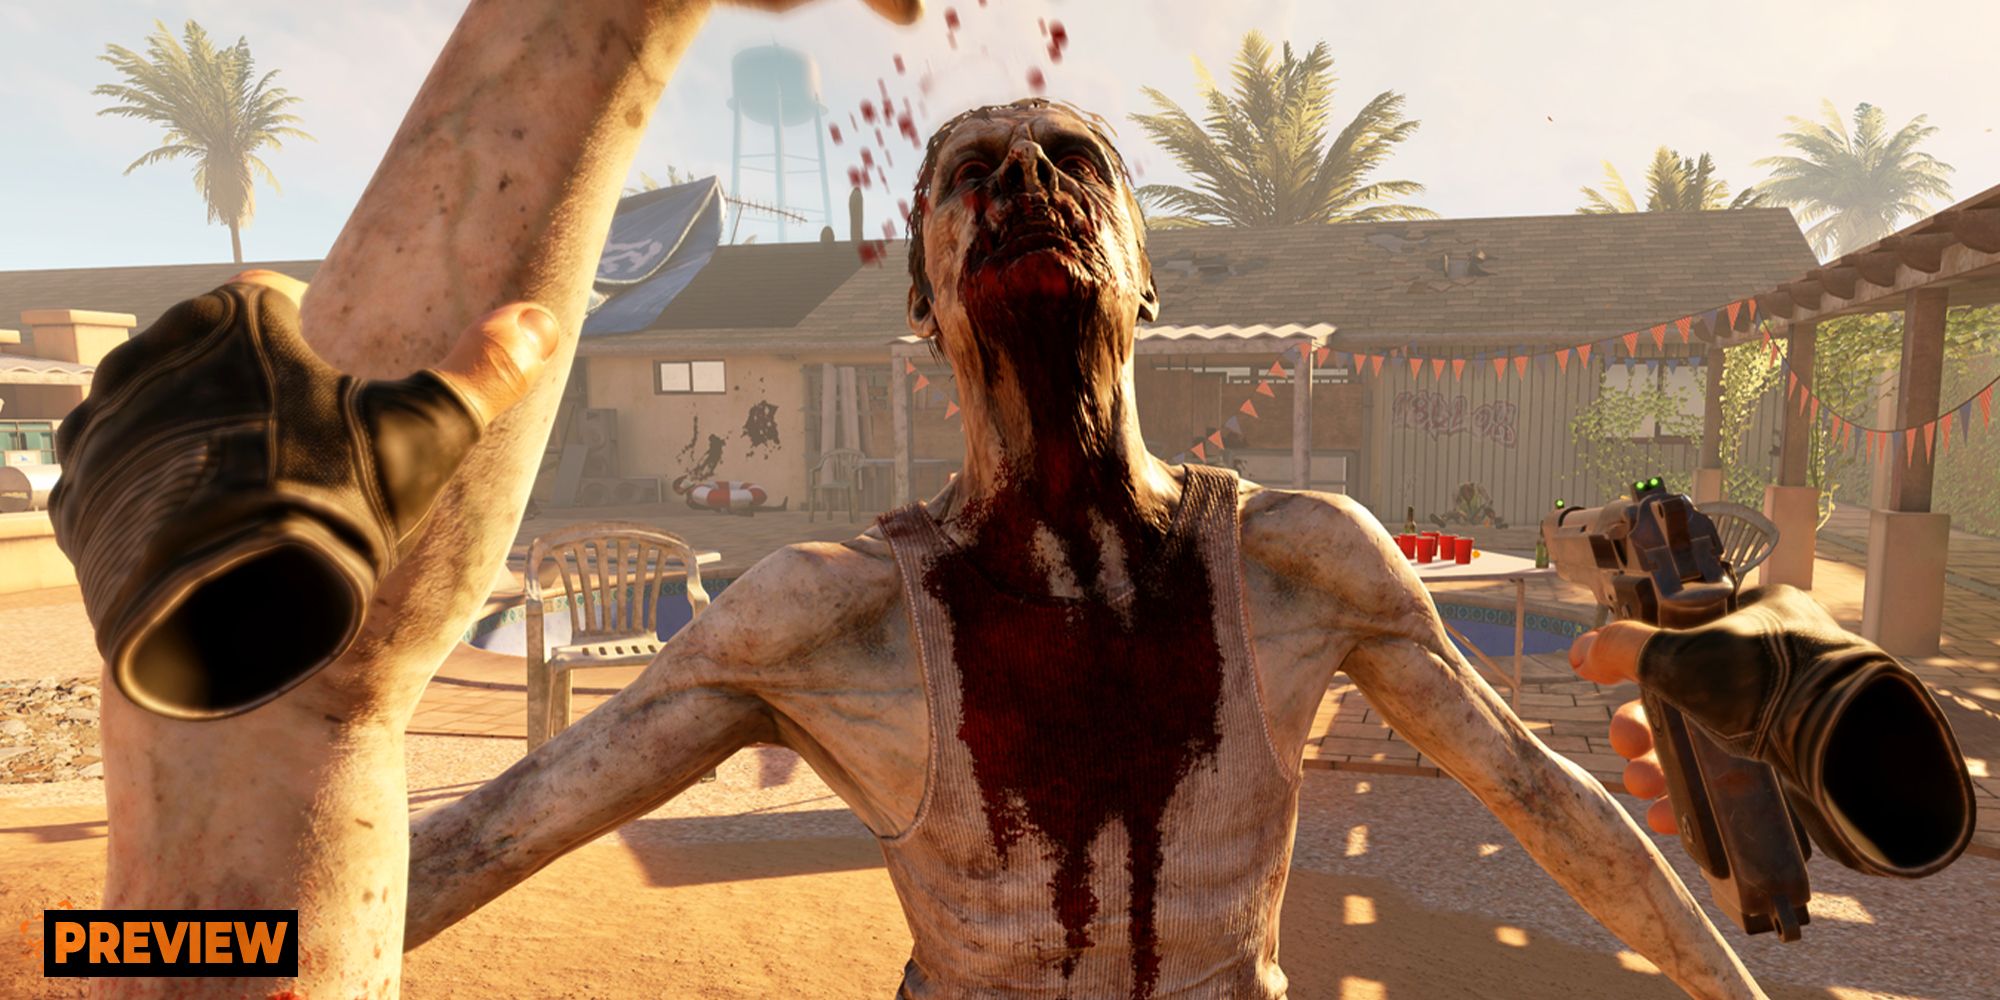 The player hits a zombie with another zombie's arm in Arizona Sunshine 2